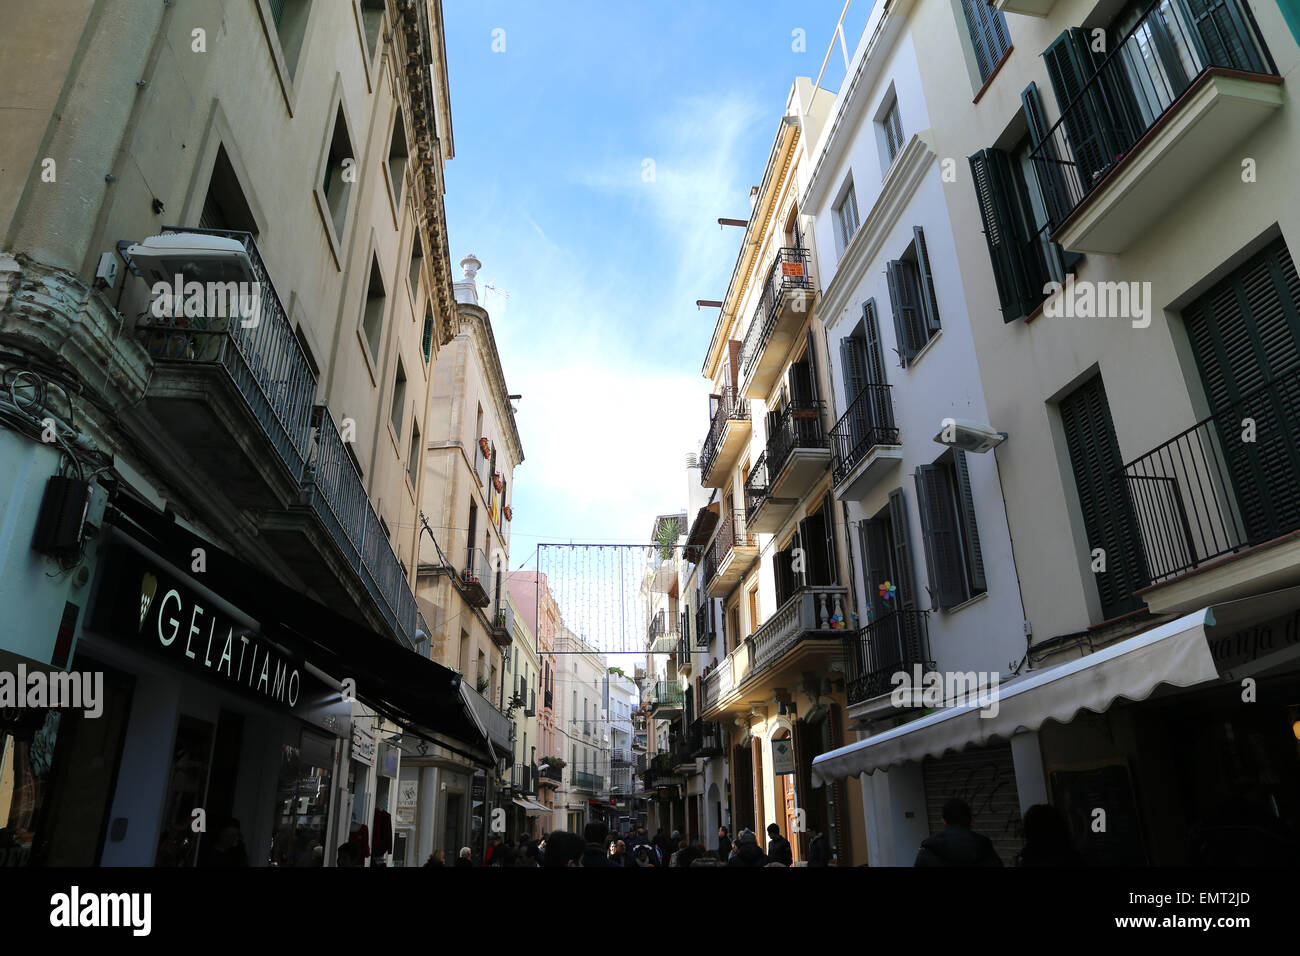 Spain. Catalonia. Sitges. Old town. Street. Stock Photo